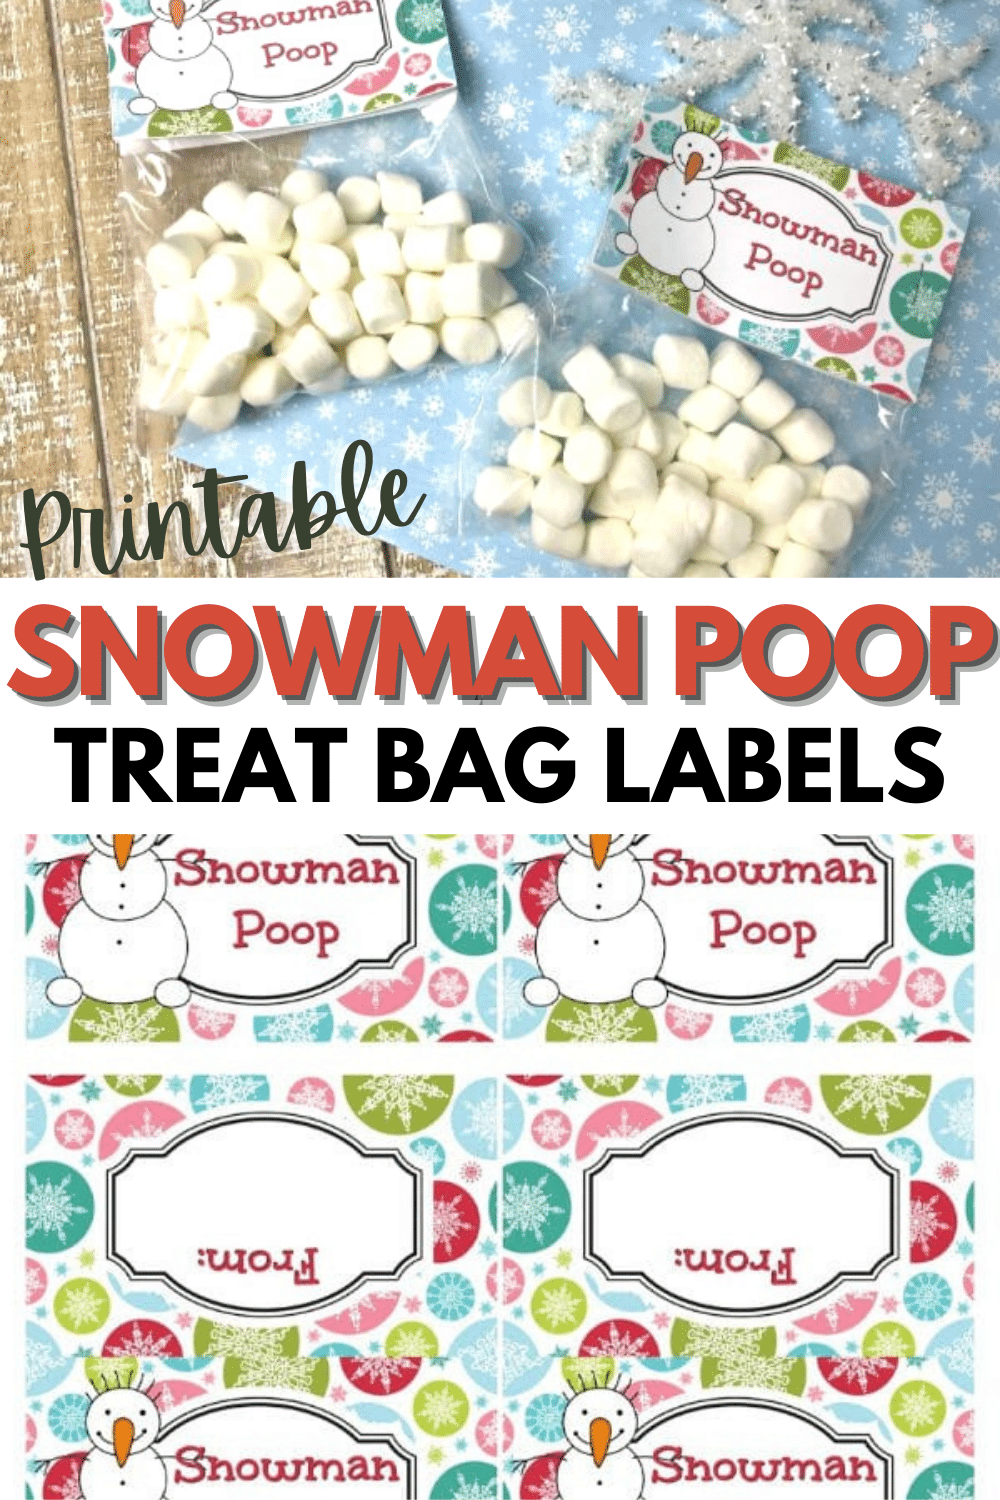 These printable Snowman Poop Treat Bag Labels are adorable and the treat bags take no time to make. Everyone loves getting a snowman poop treat bag. #treatbags #printables #snowmanpoop via @wondermomwannab